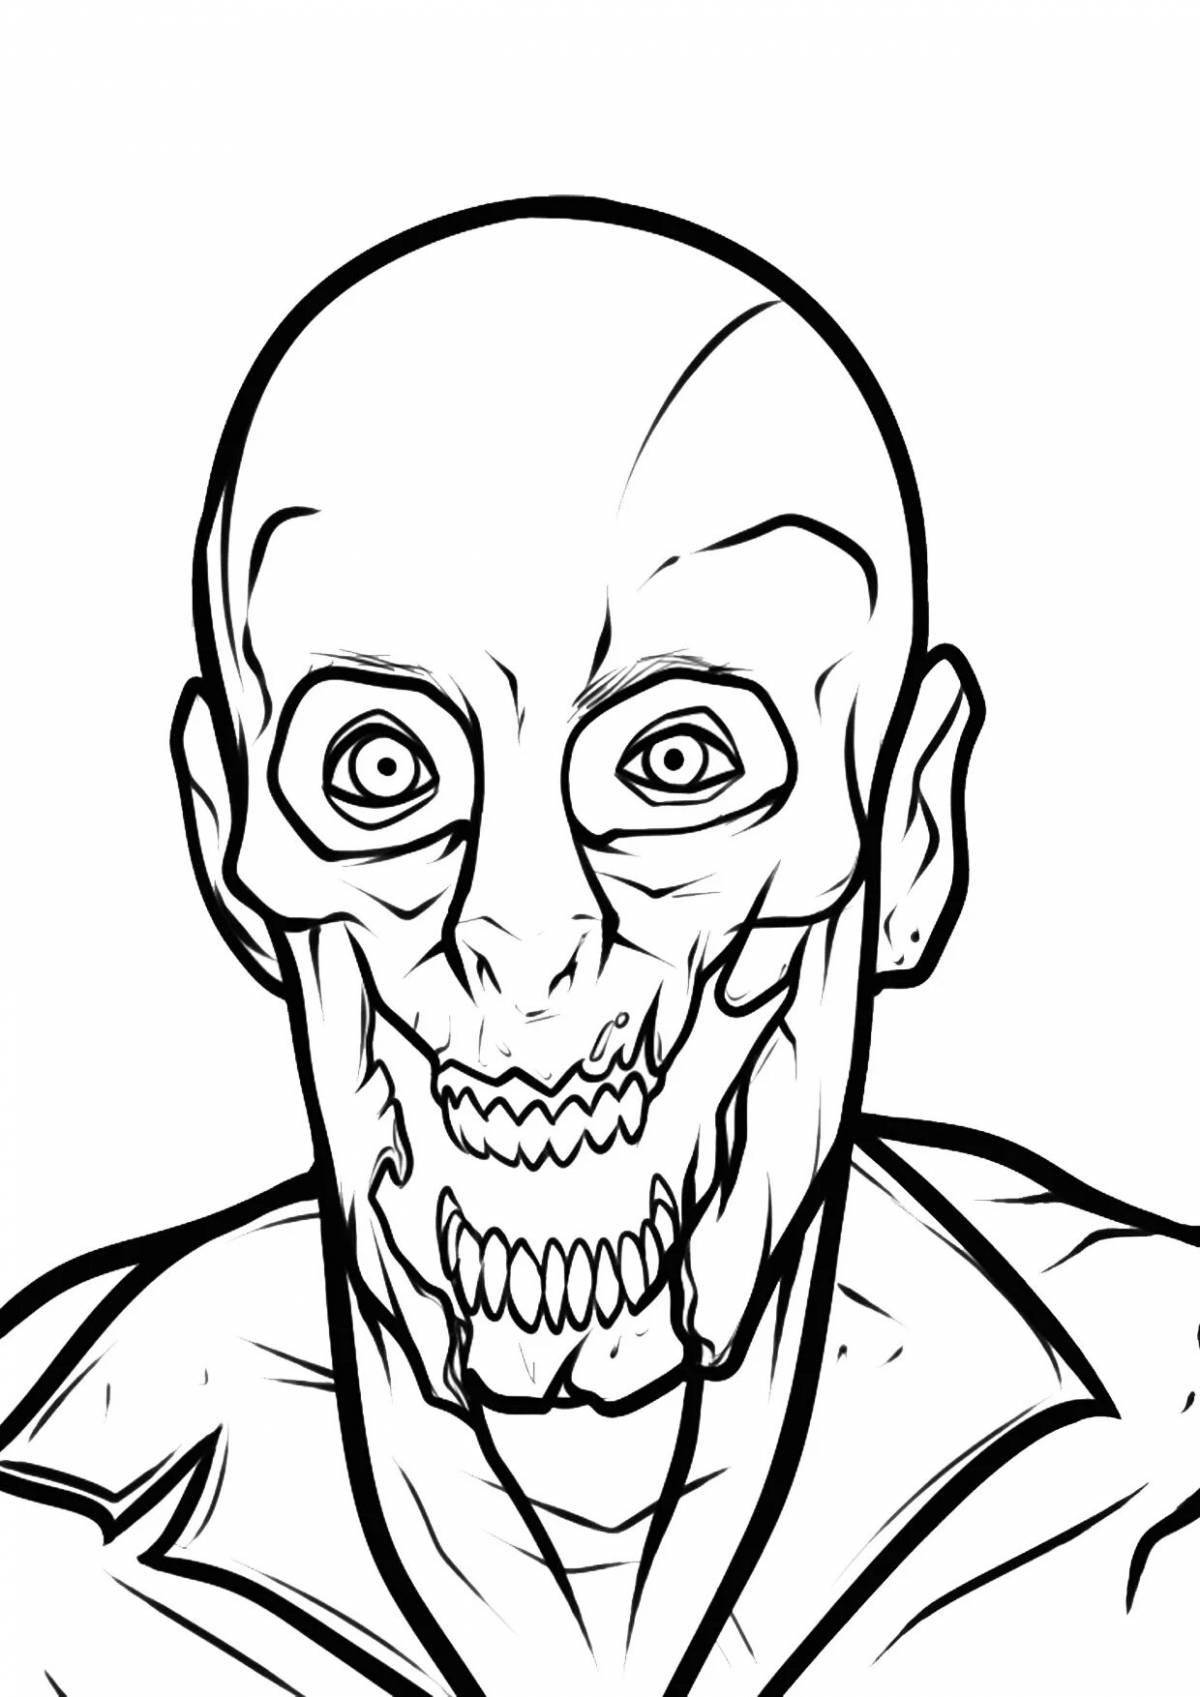 Cooling scary face coloring page